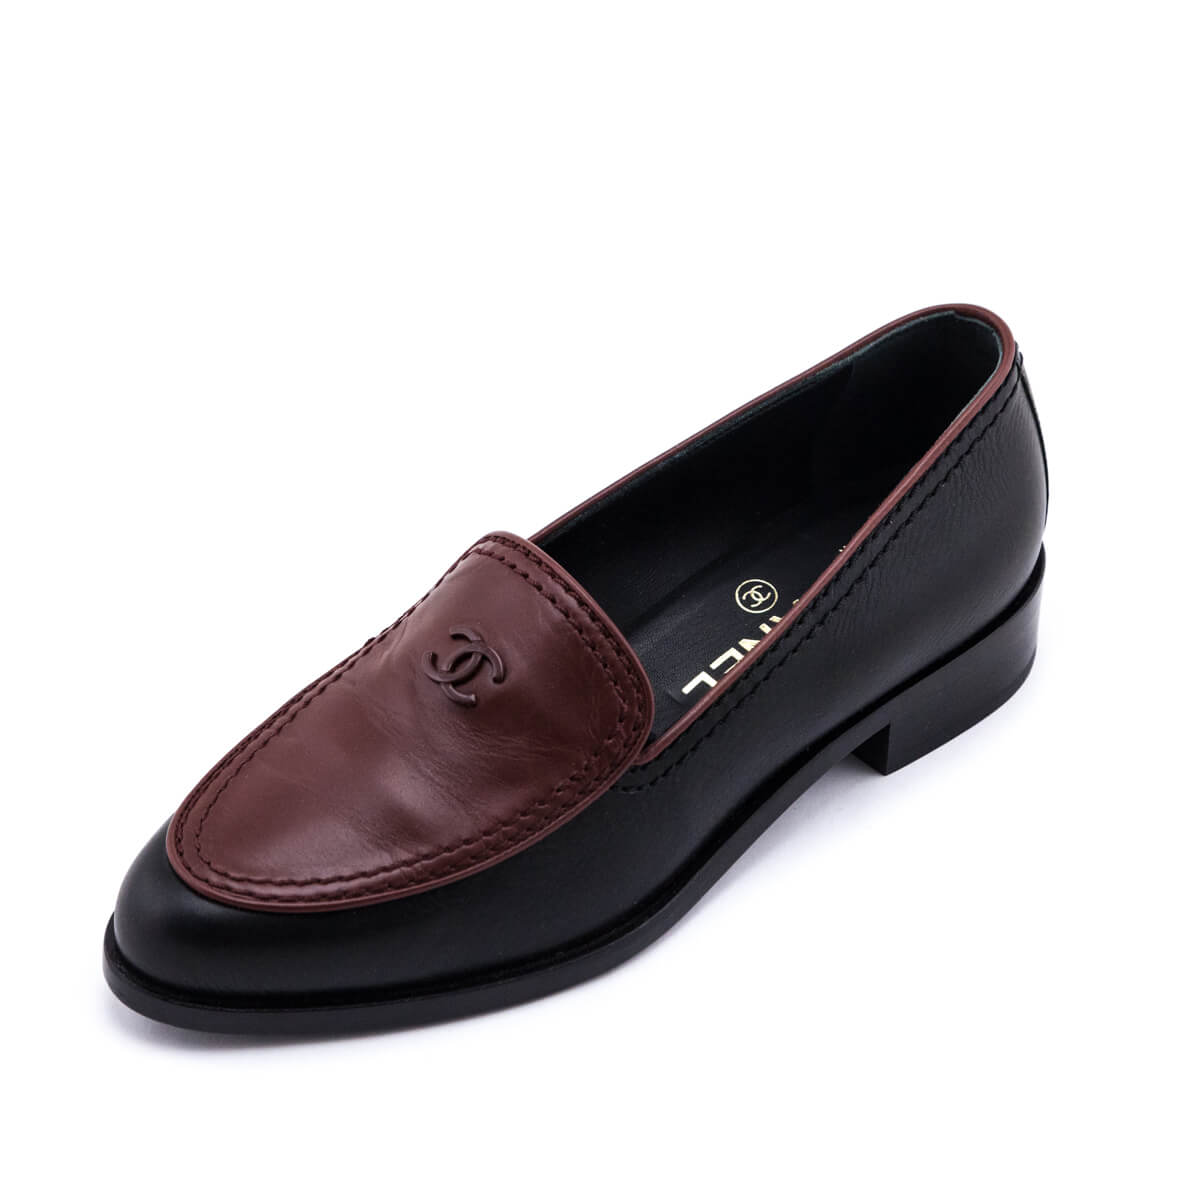 Chanel Black & Burgundy CC Loafers - Secondhand Chanel Loafers